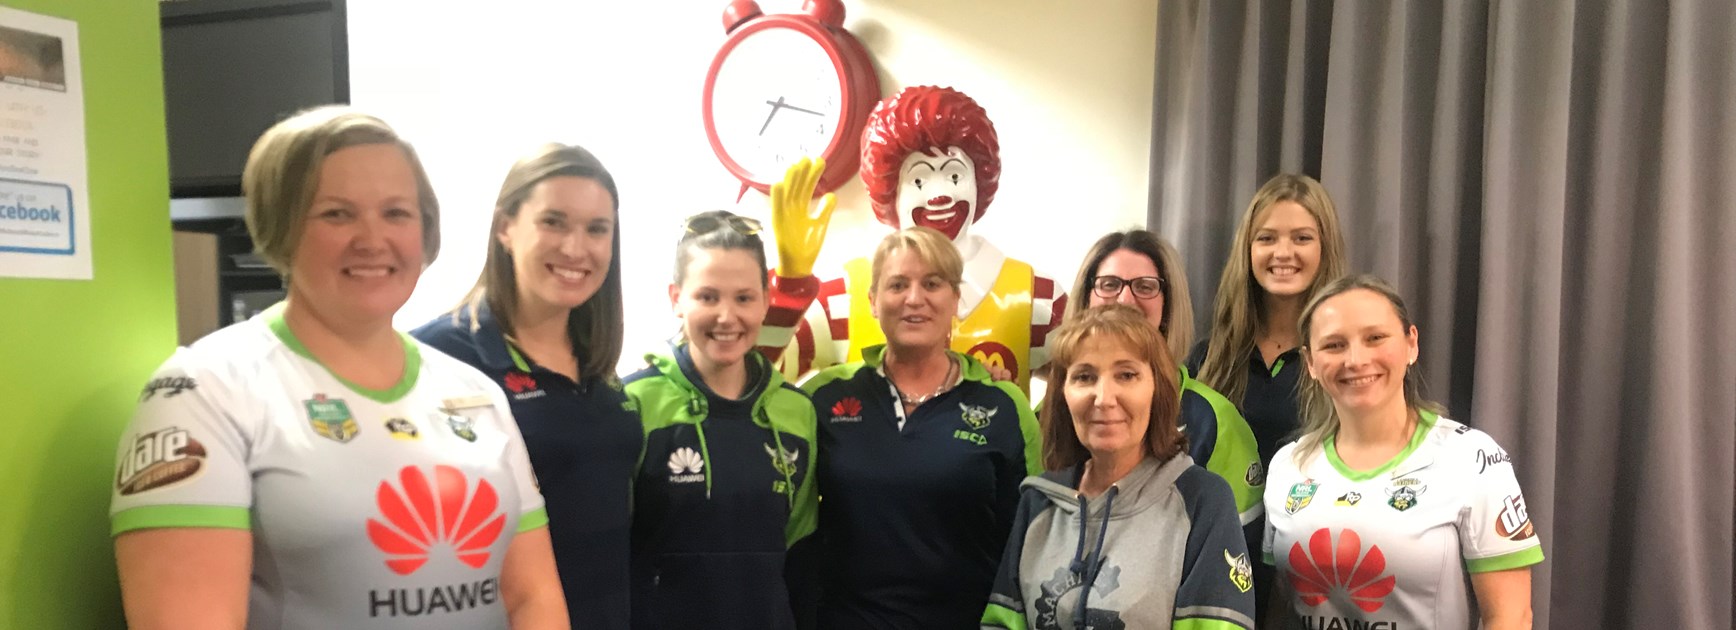 Raiders Support RMHC Canberra